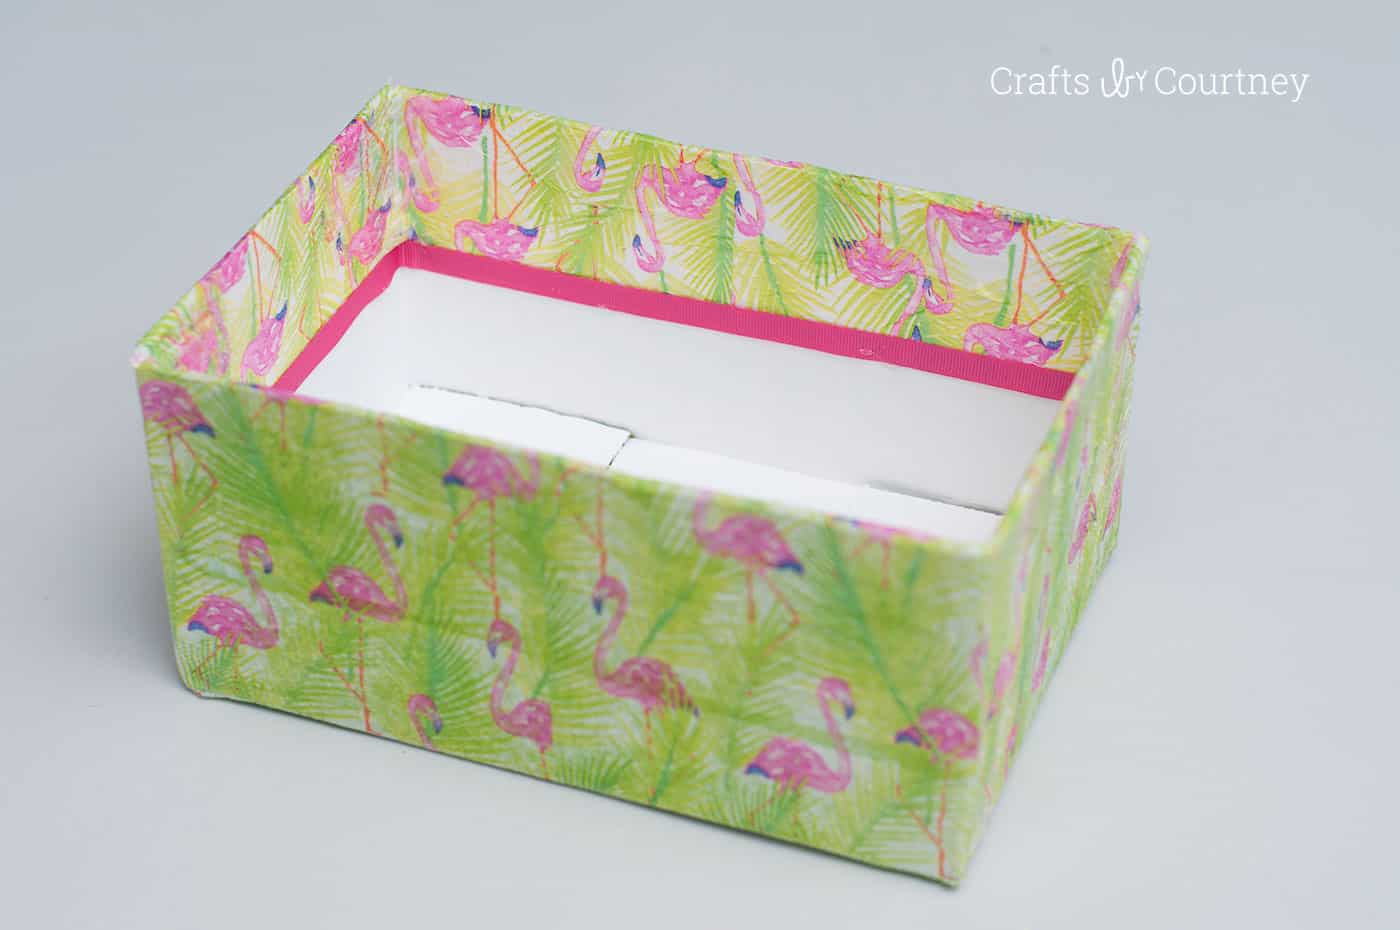 Use napkins from the dollar store along with decoupage medium in this unique box makeover project. It's so inexpensive and easy to do!